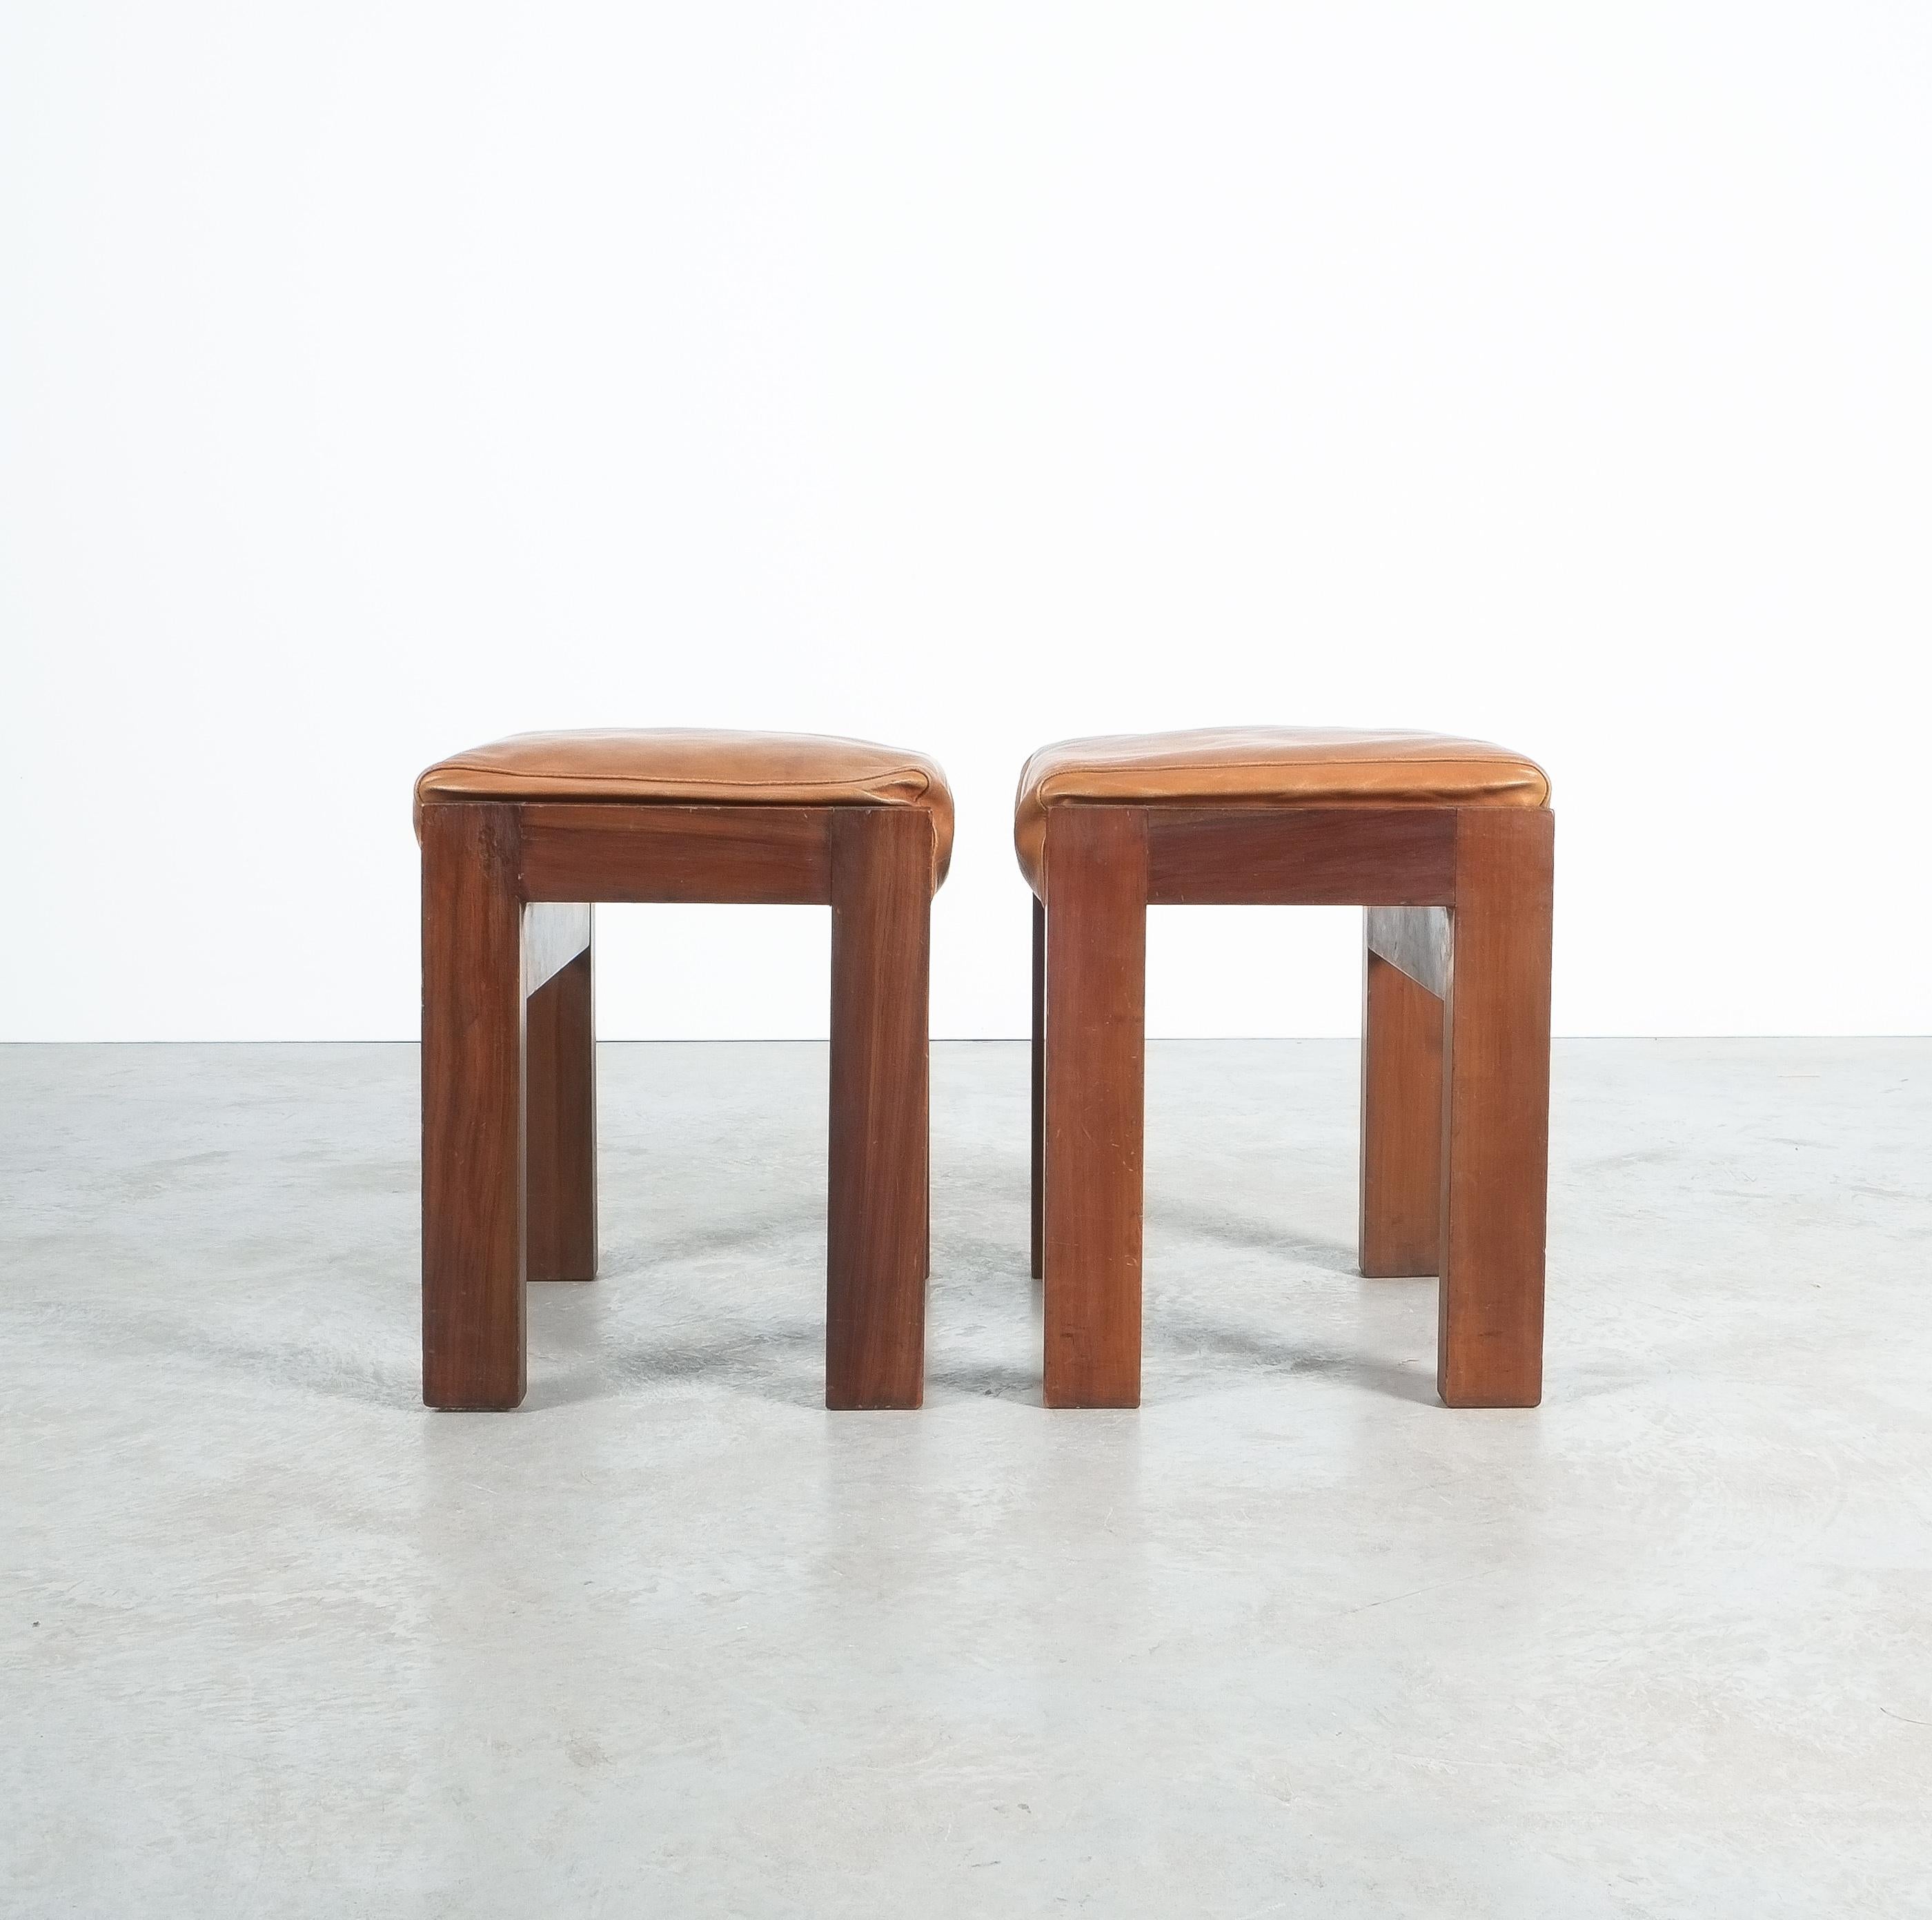 Maple and Leather Midcentury Wood Stools, Italy, 1950 For Sale 1